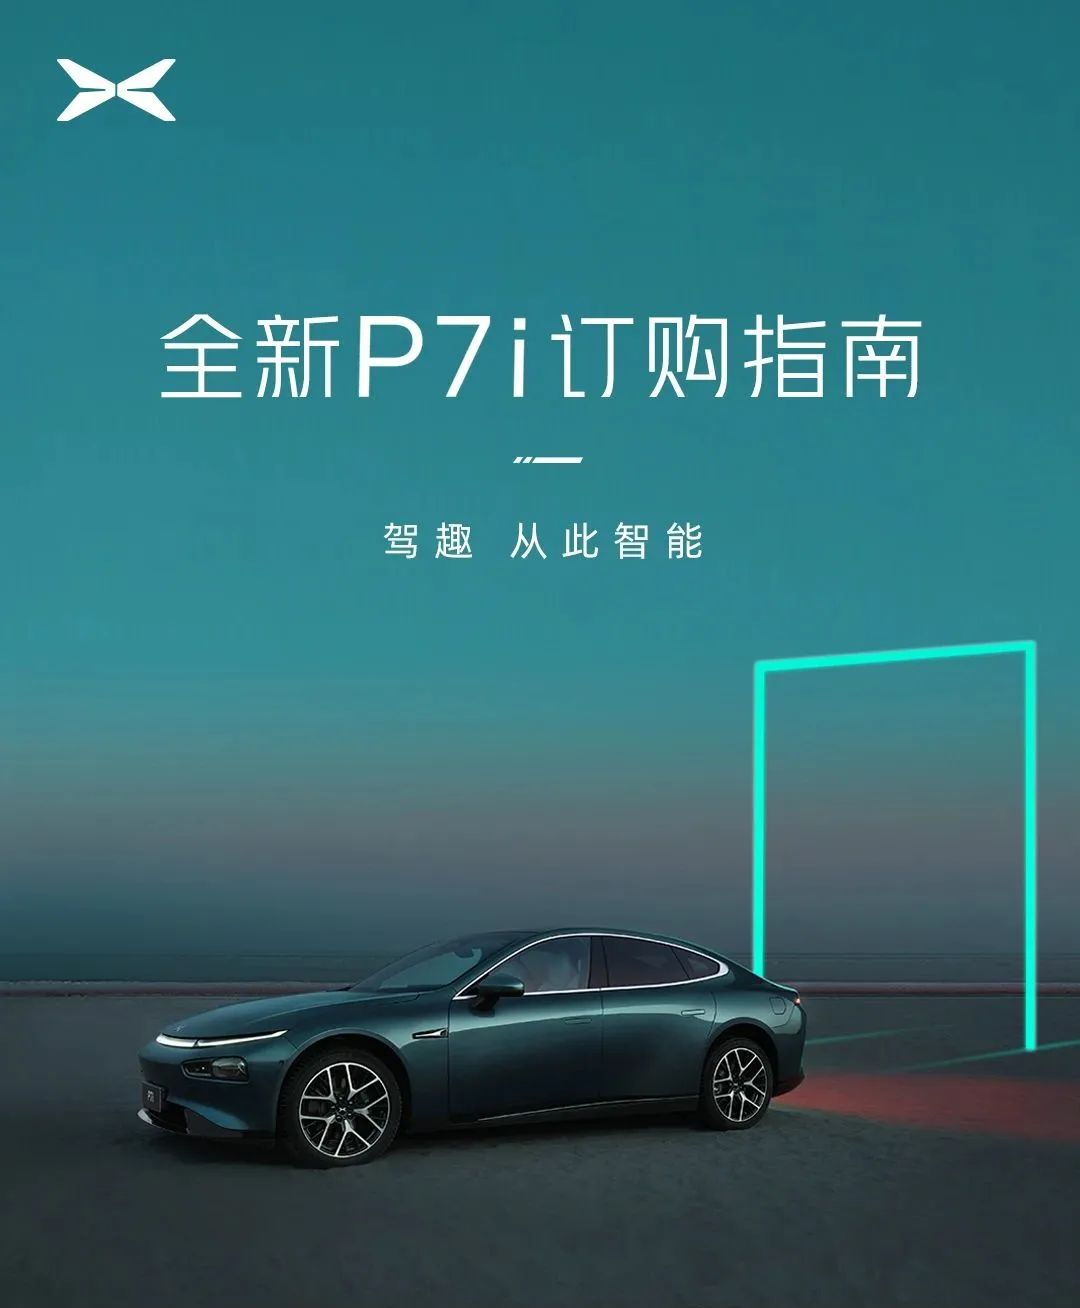 Xpeng all-new P7i is on the market, able to use the full-scenario intelligent assisted driving